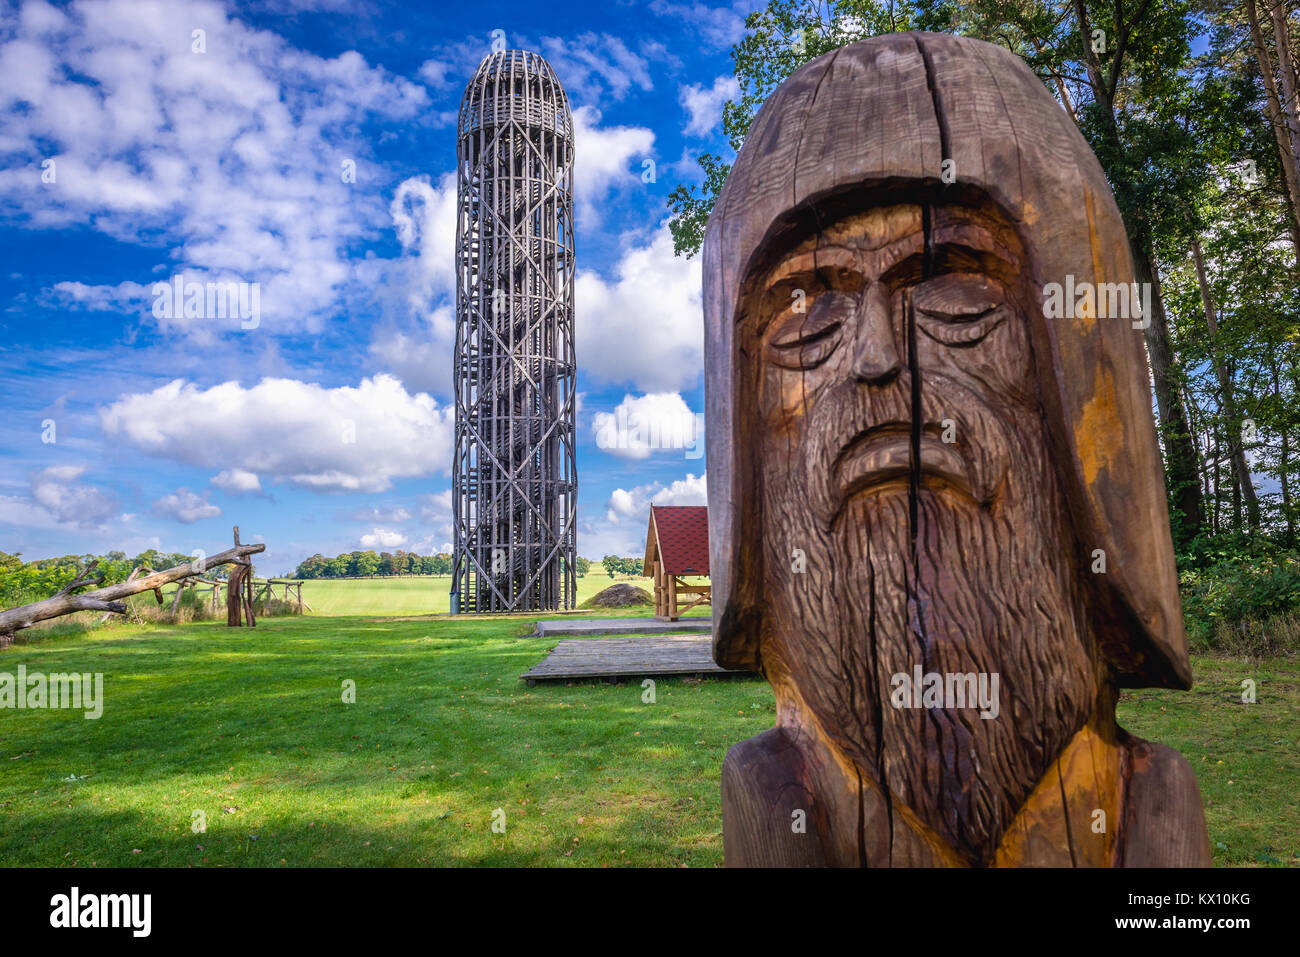 Timber observation tower called Cucmber Tower designed by Jan Vondrak near Hermanice village in Liberec District of Czech Republic Stock Photo